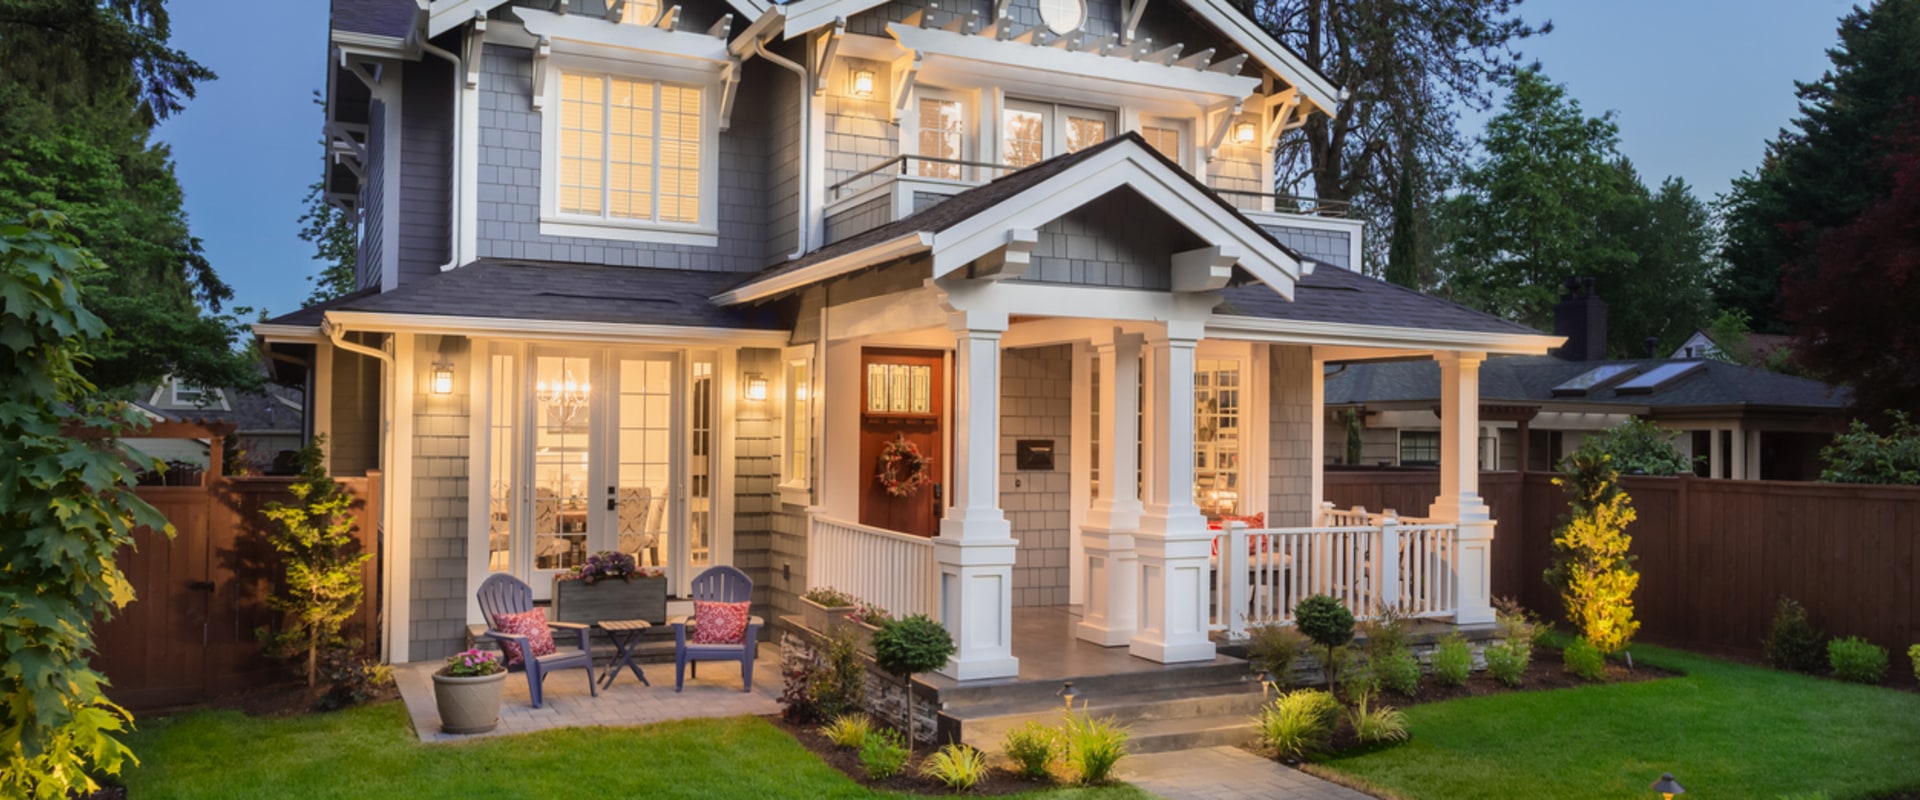 Does landscaping add to the value of your home?